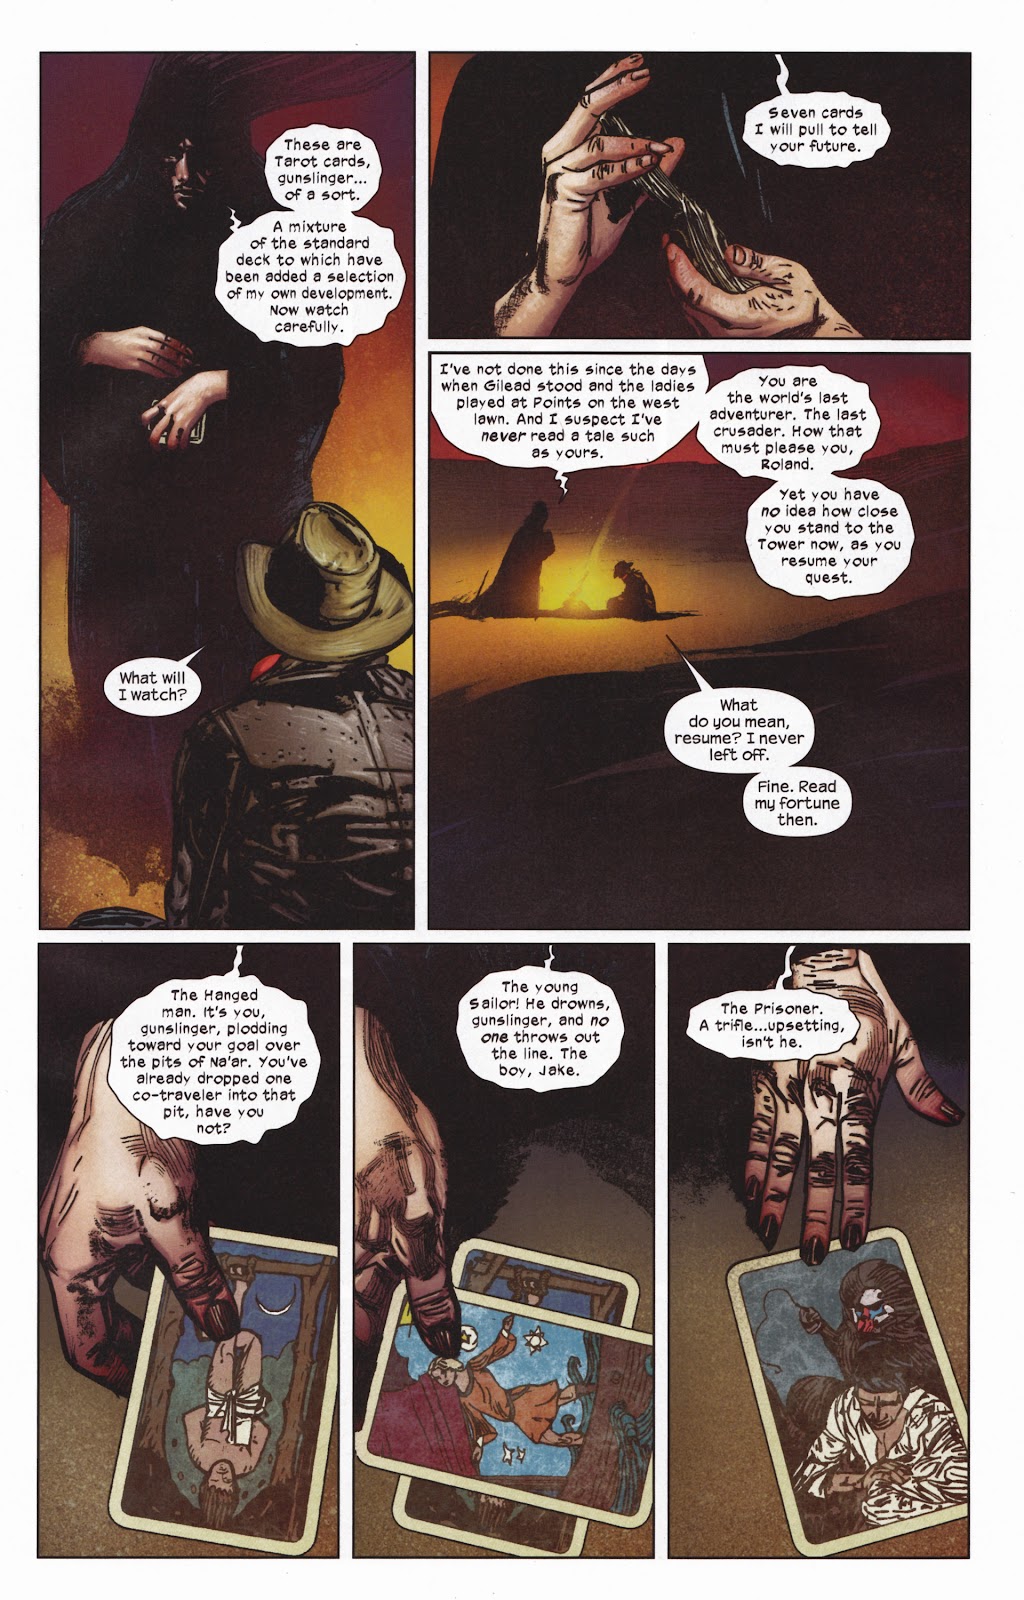 Dark Tower: The Gunslinger - The Man in Black issue 5 - Page 8